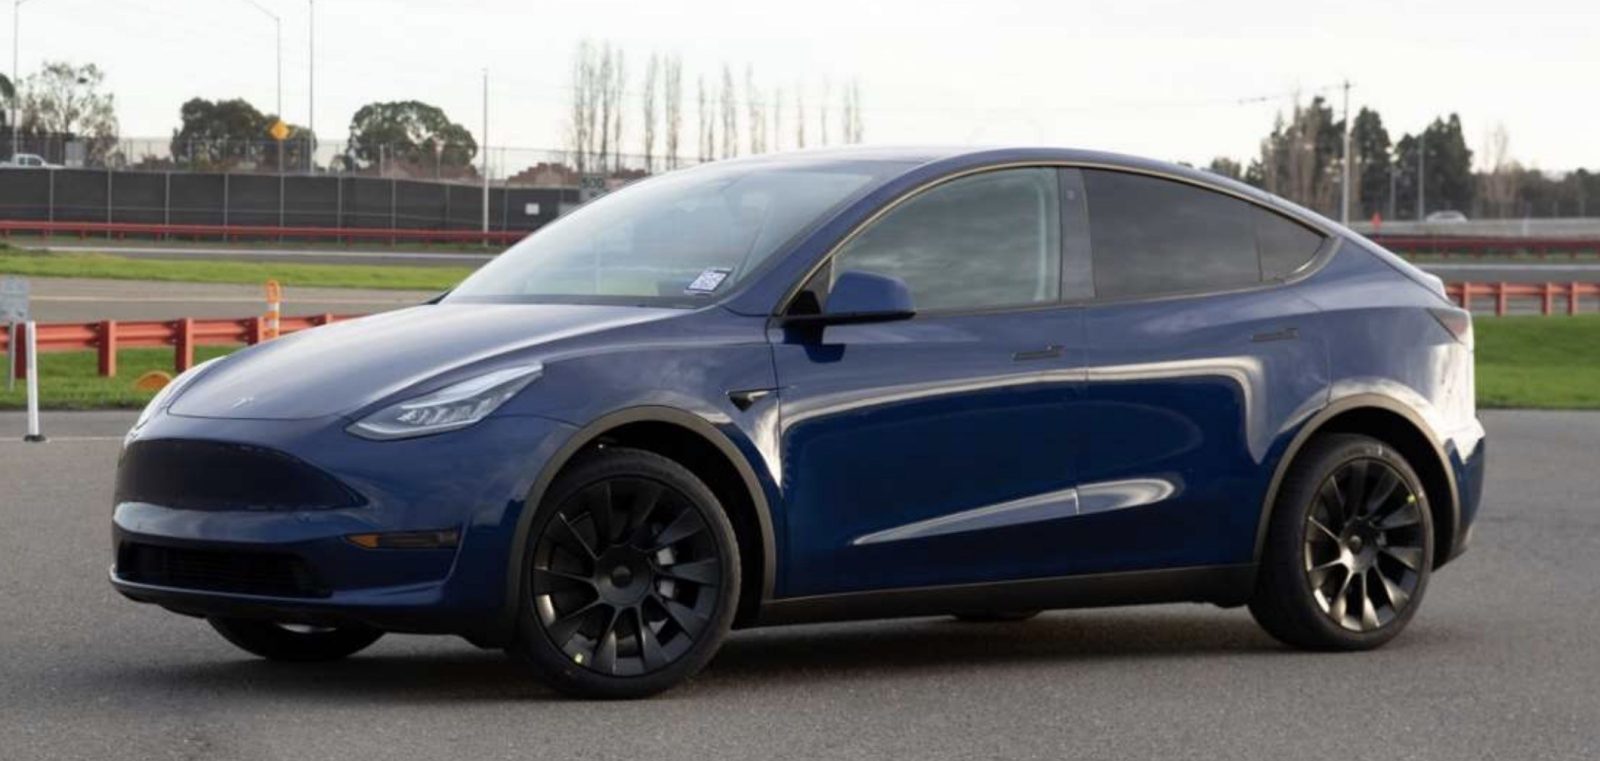 Tesla Sells Out First Quarter Of Model Y Electric Suv In China In Just A Few Days Electrek